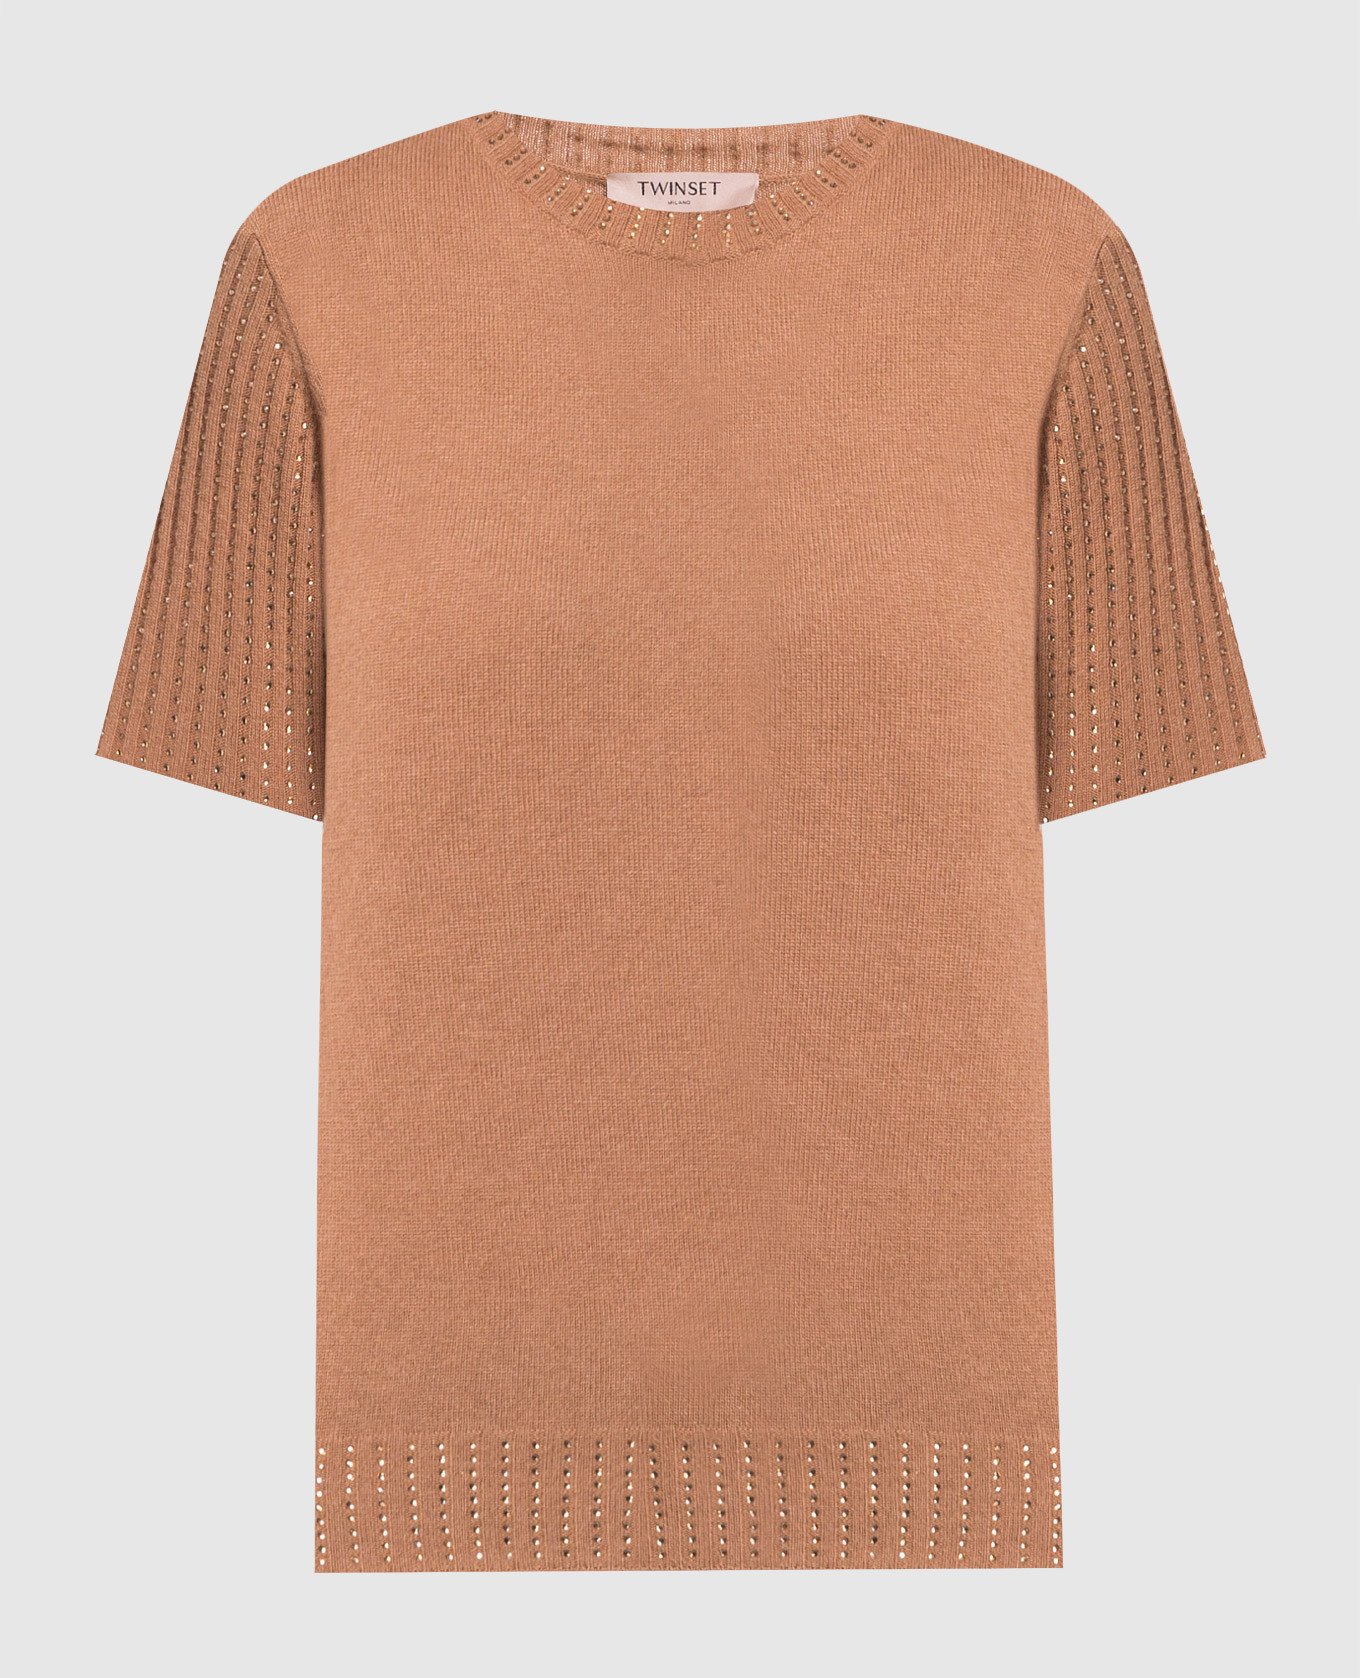 Brown jumper with crystals